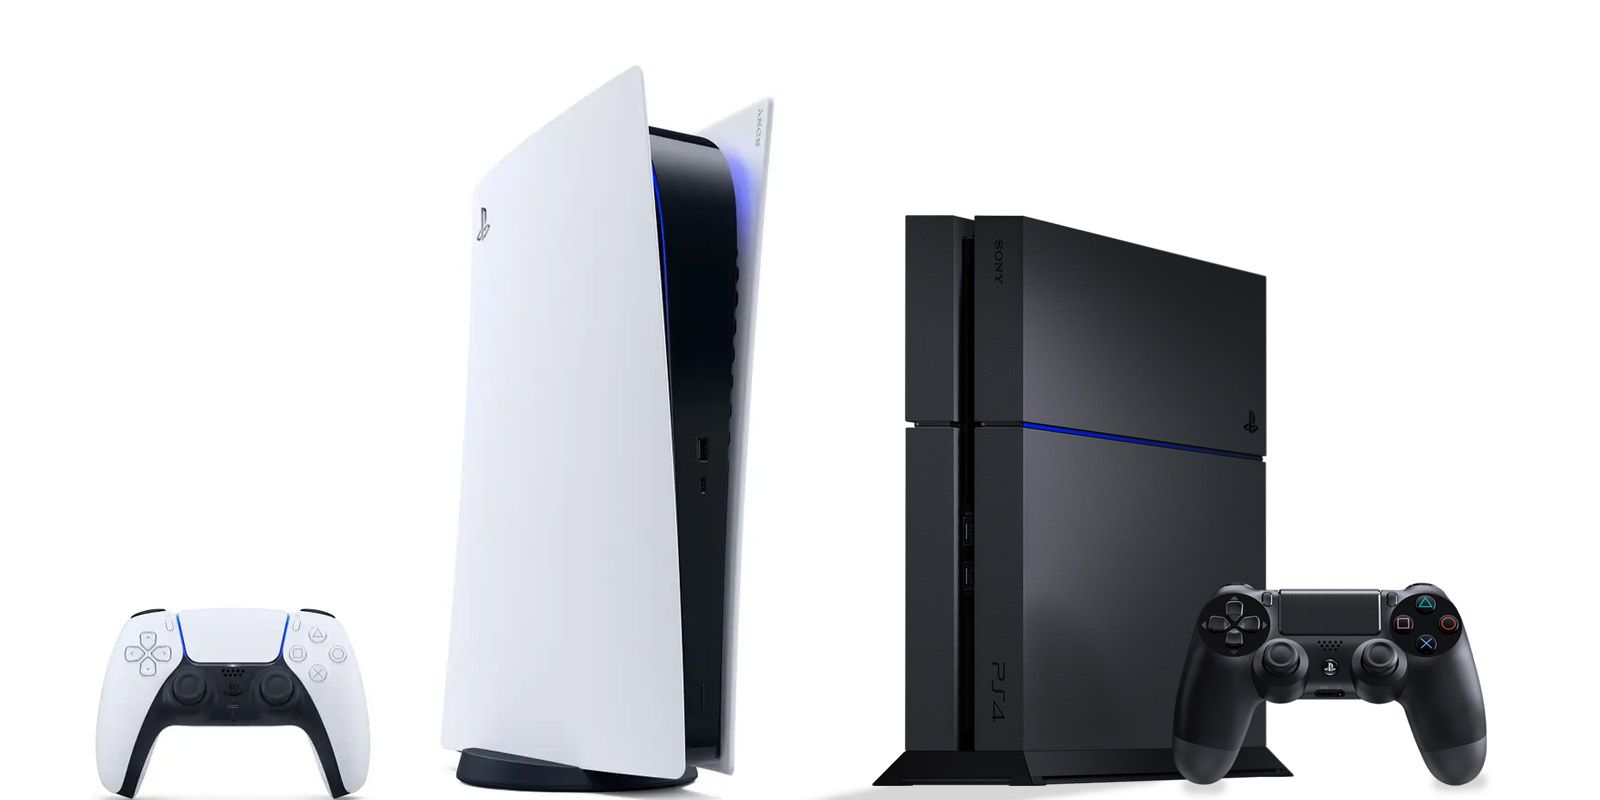 How the PlayStation 4 Can Maintain their Lead in the Console War